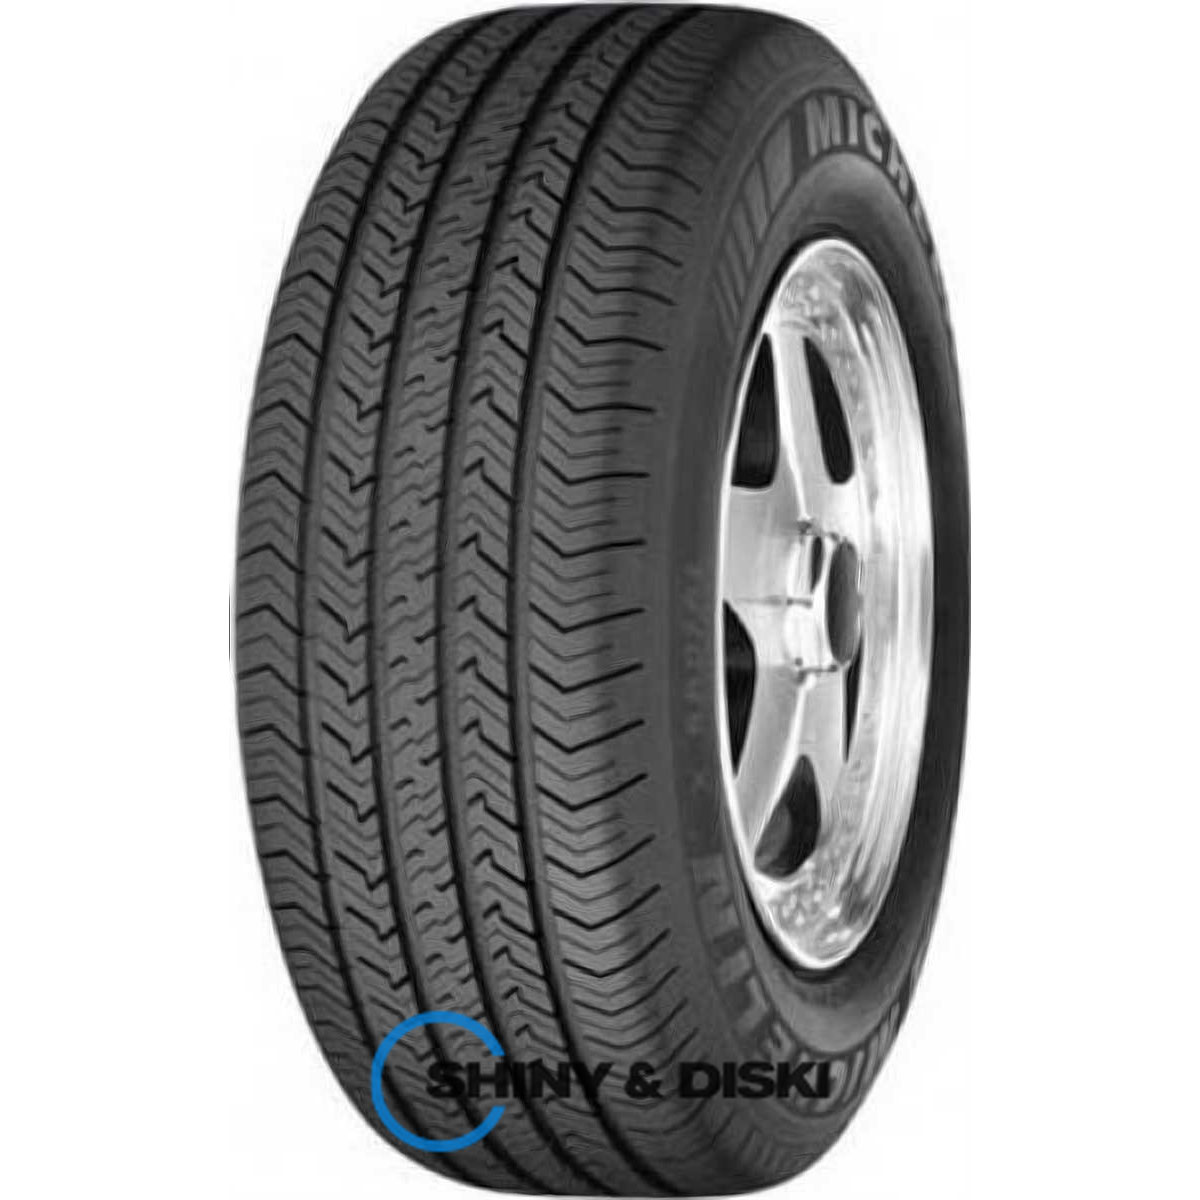 michelin x-radial dt 185/65 r14 86s